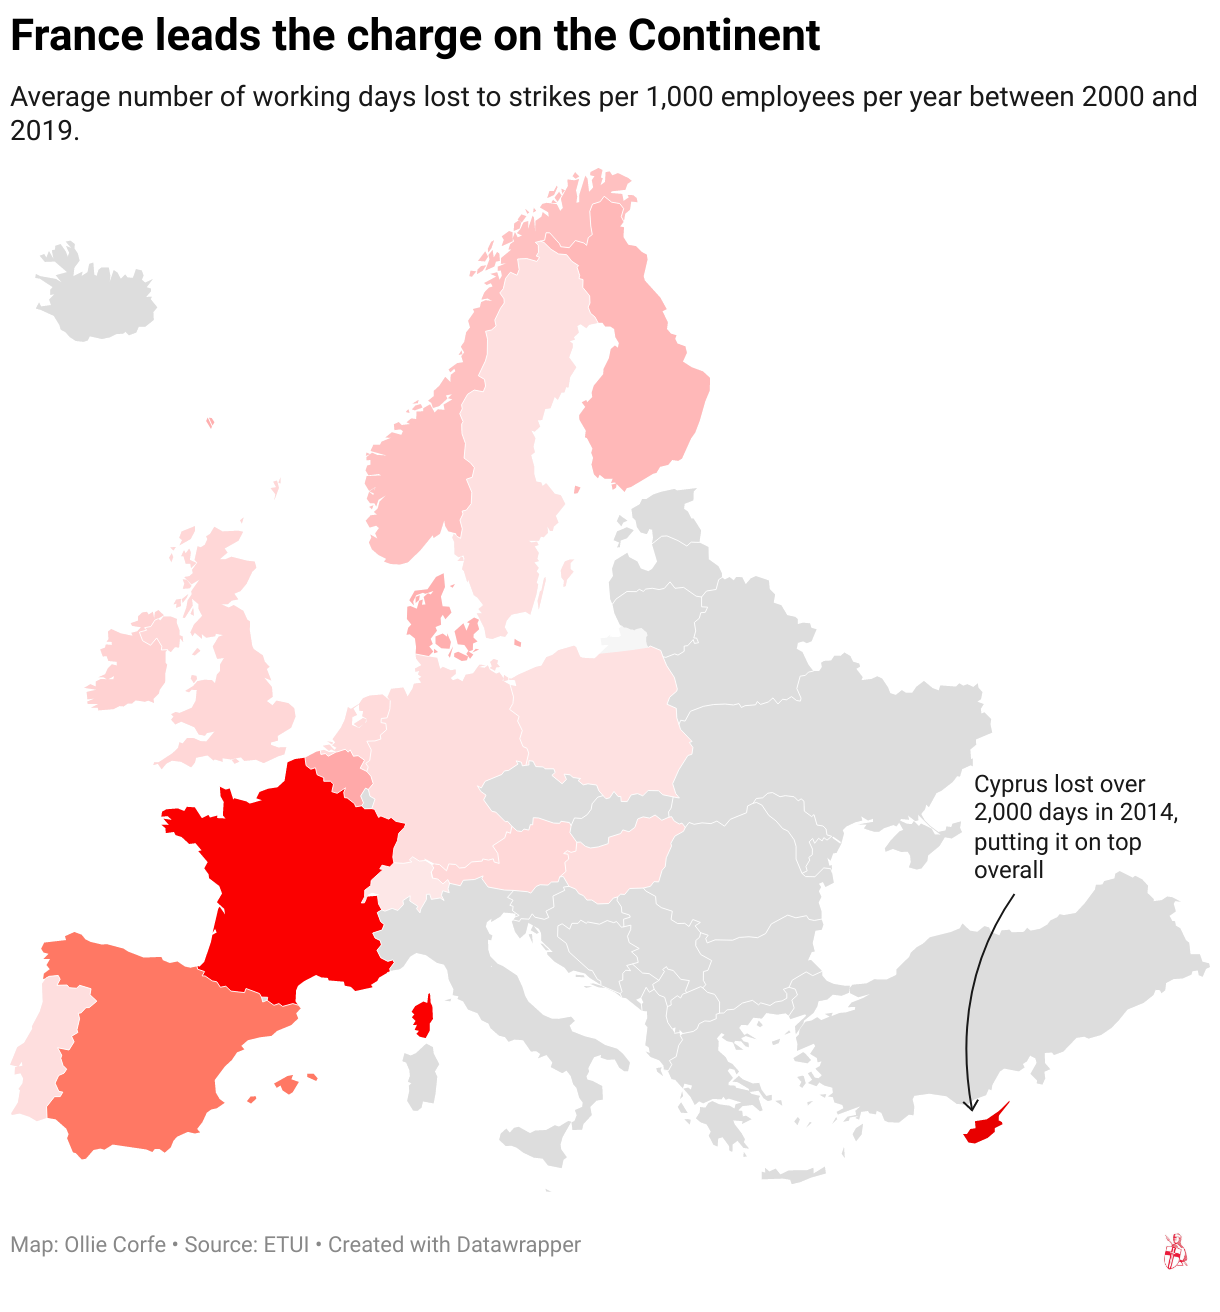 Map of Europe coloured according to how many days were lost to strikes per 1,000 employees.